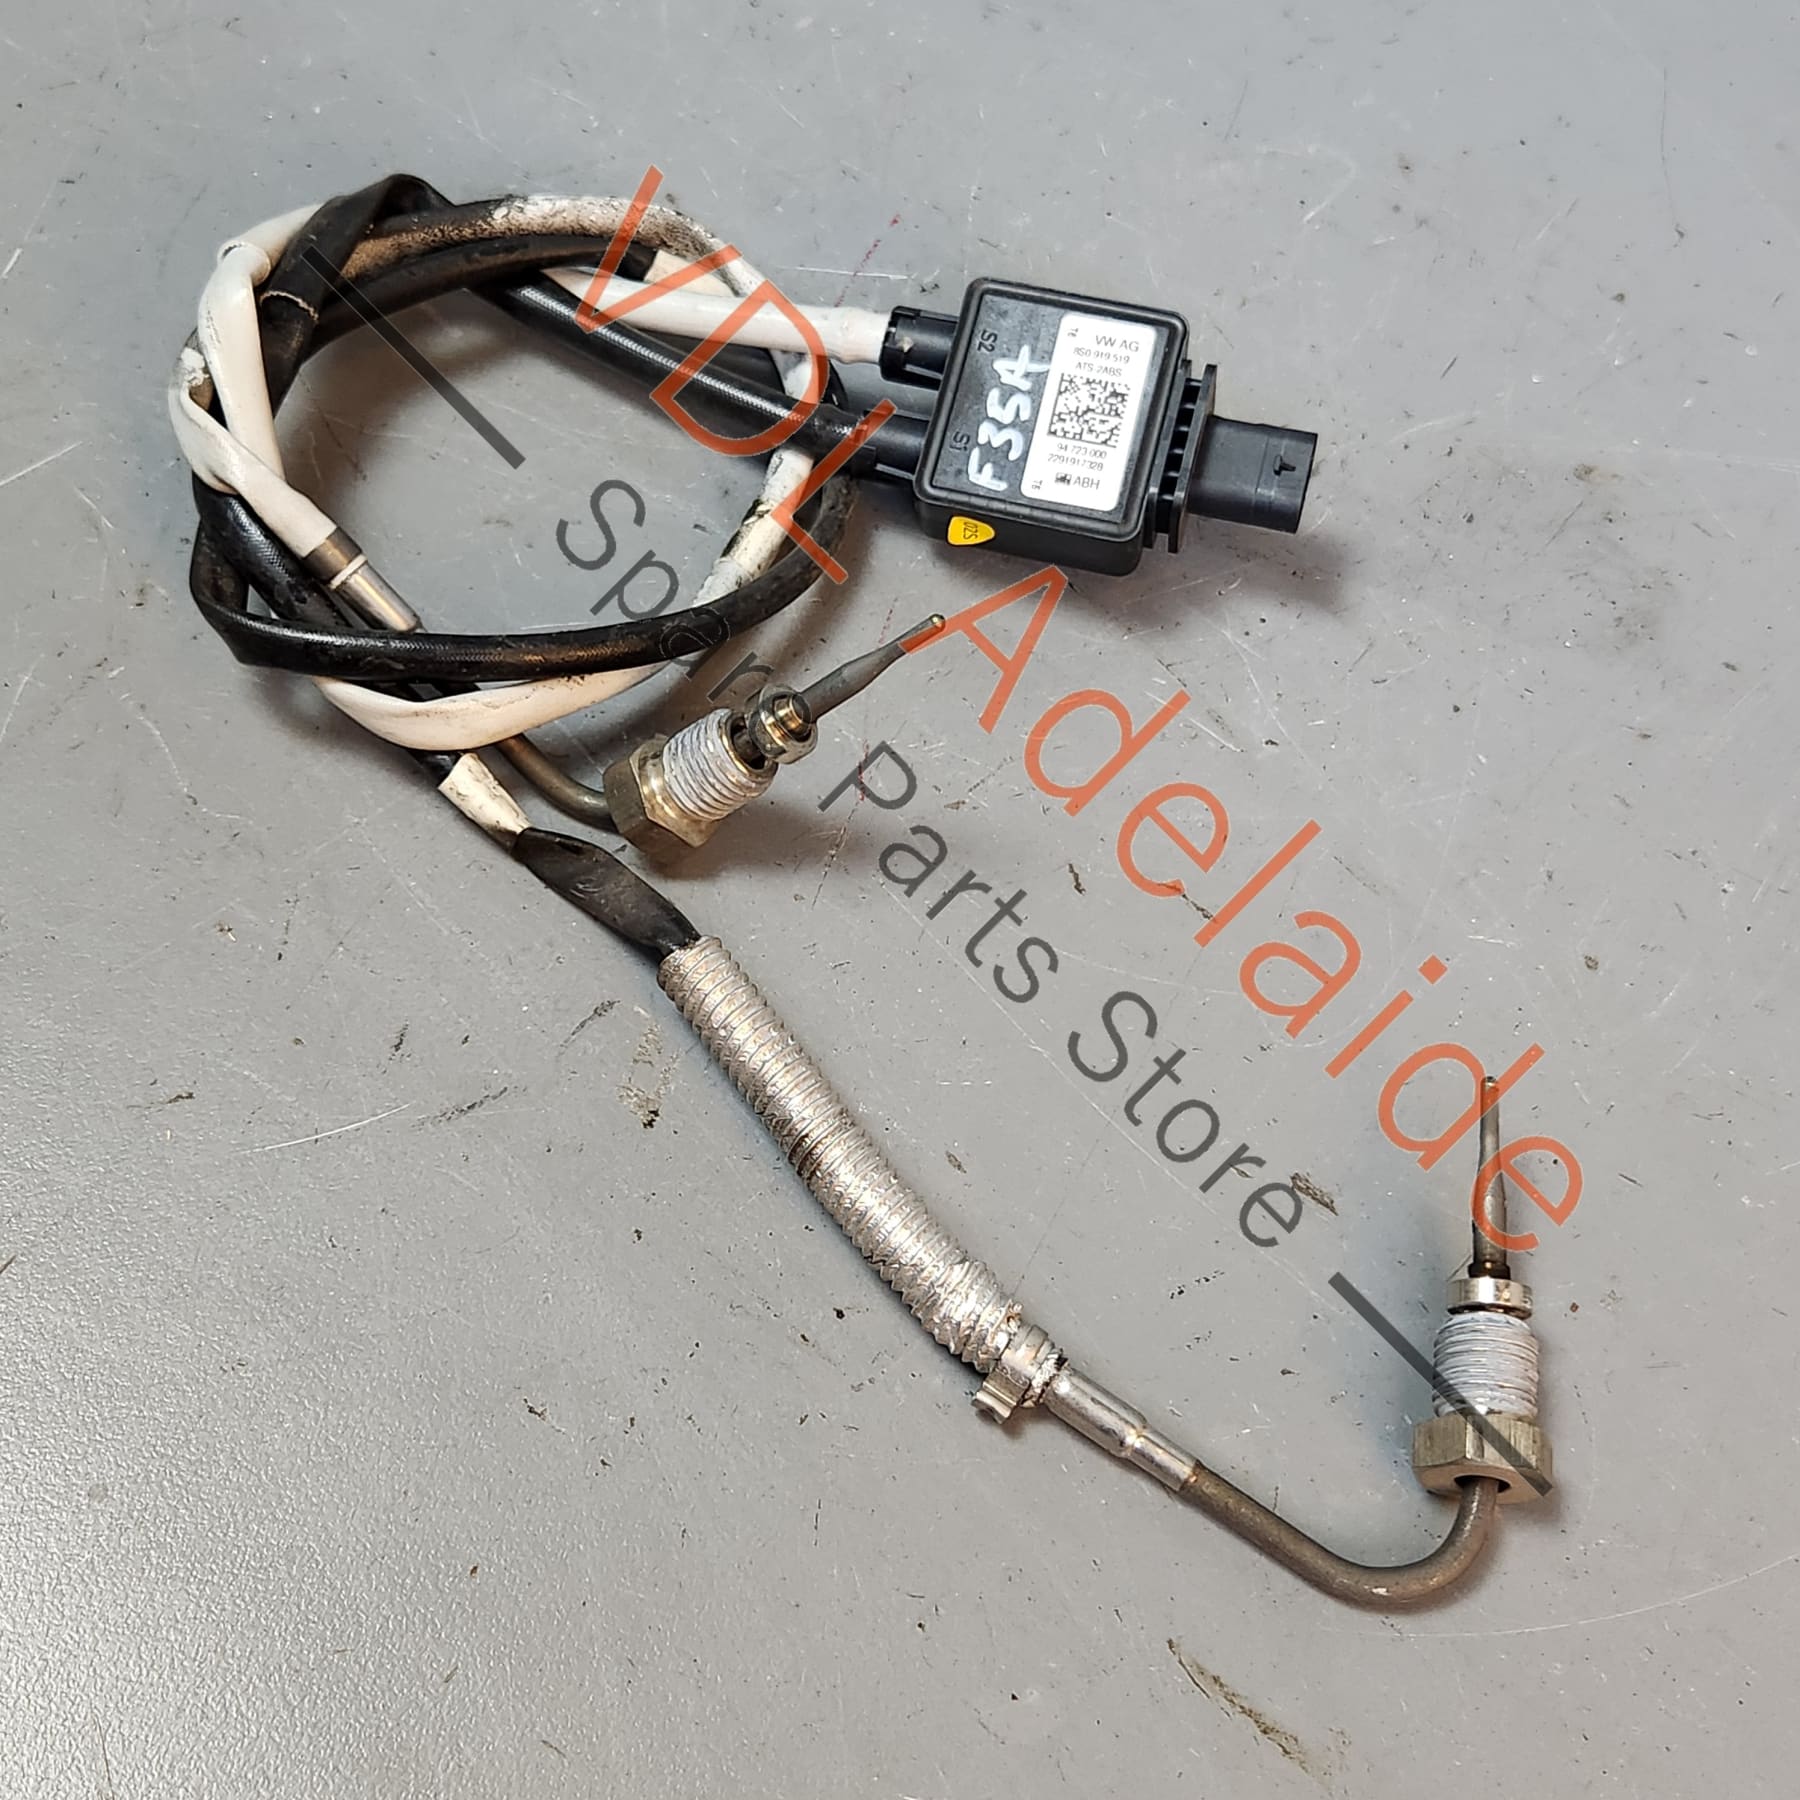 8S0919519 057906051H   Audi RS3 RSQ3 F3 Exhaust Pressure Difference Sensor After Particulate Filter 8S0919519 057906051H